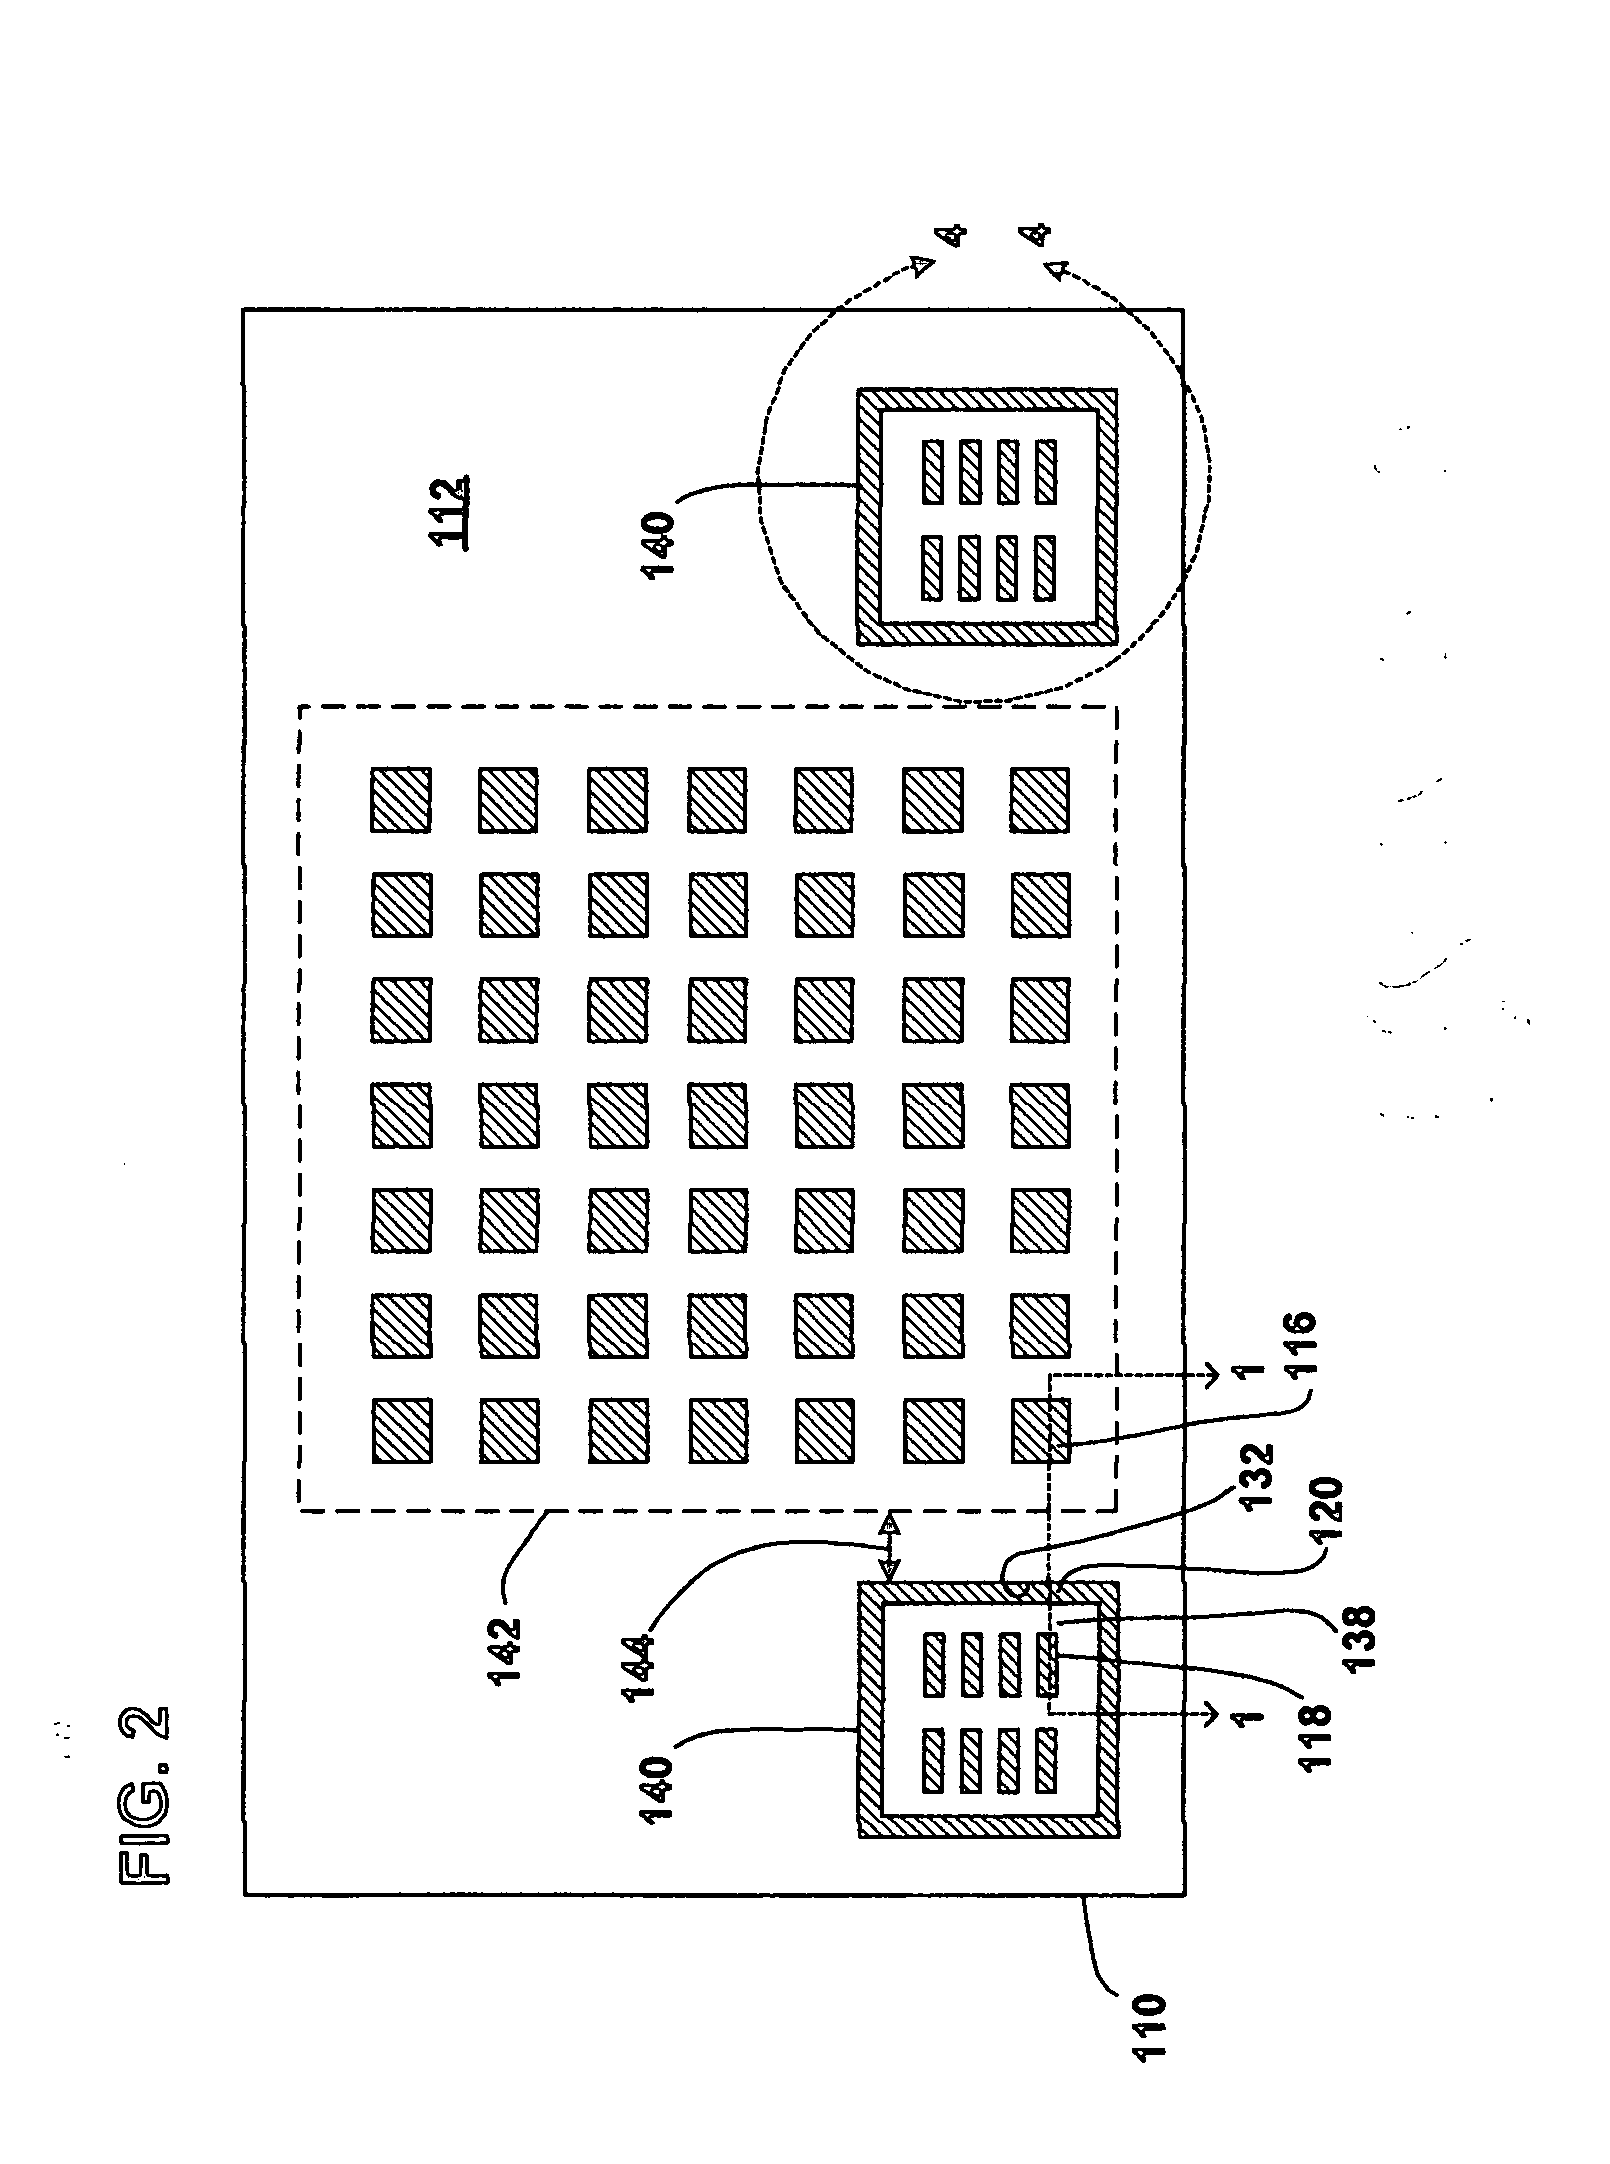 Local control of underfill flow on high density packages, packages and systems made therewith, and methods of making same